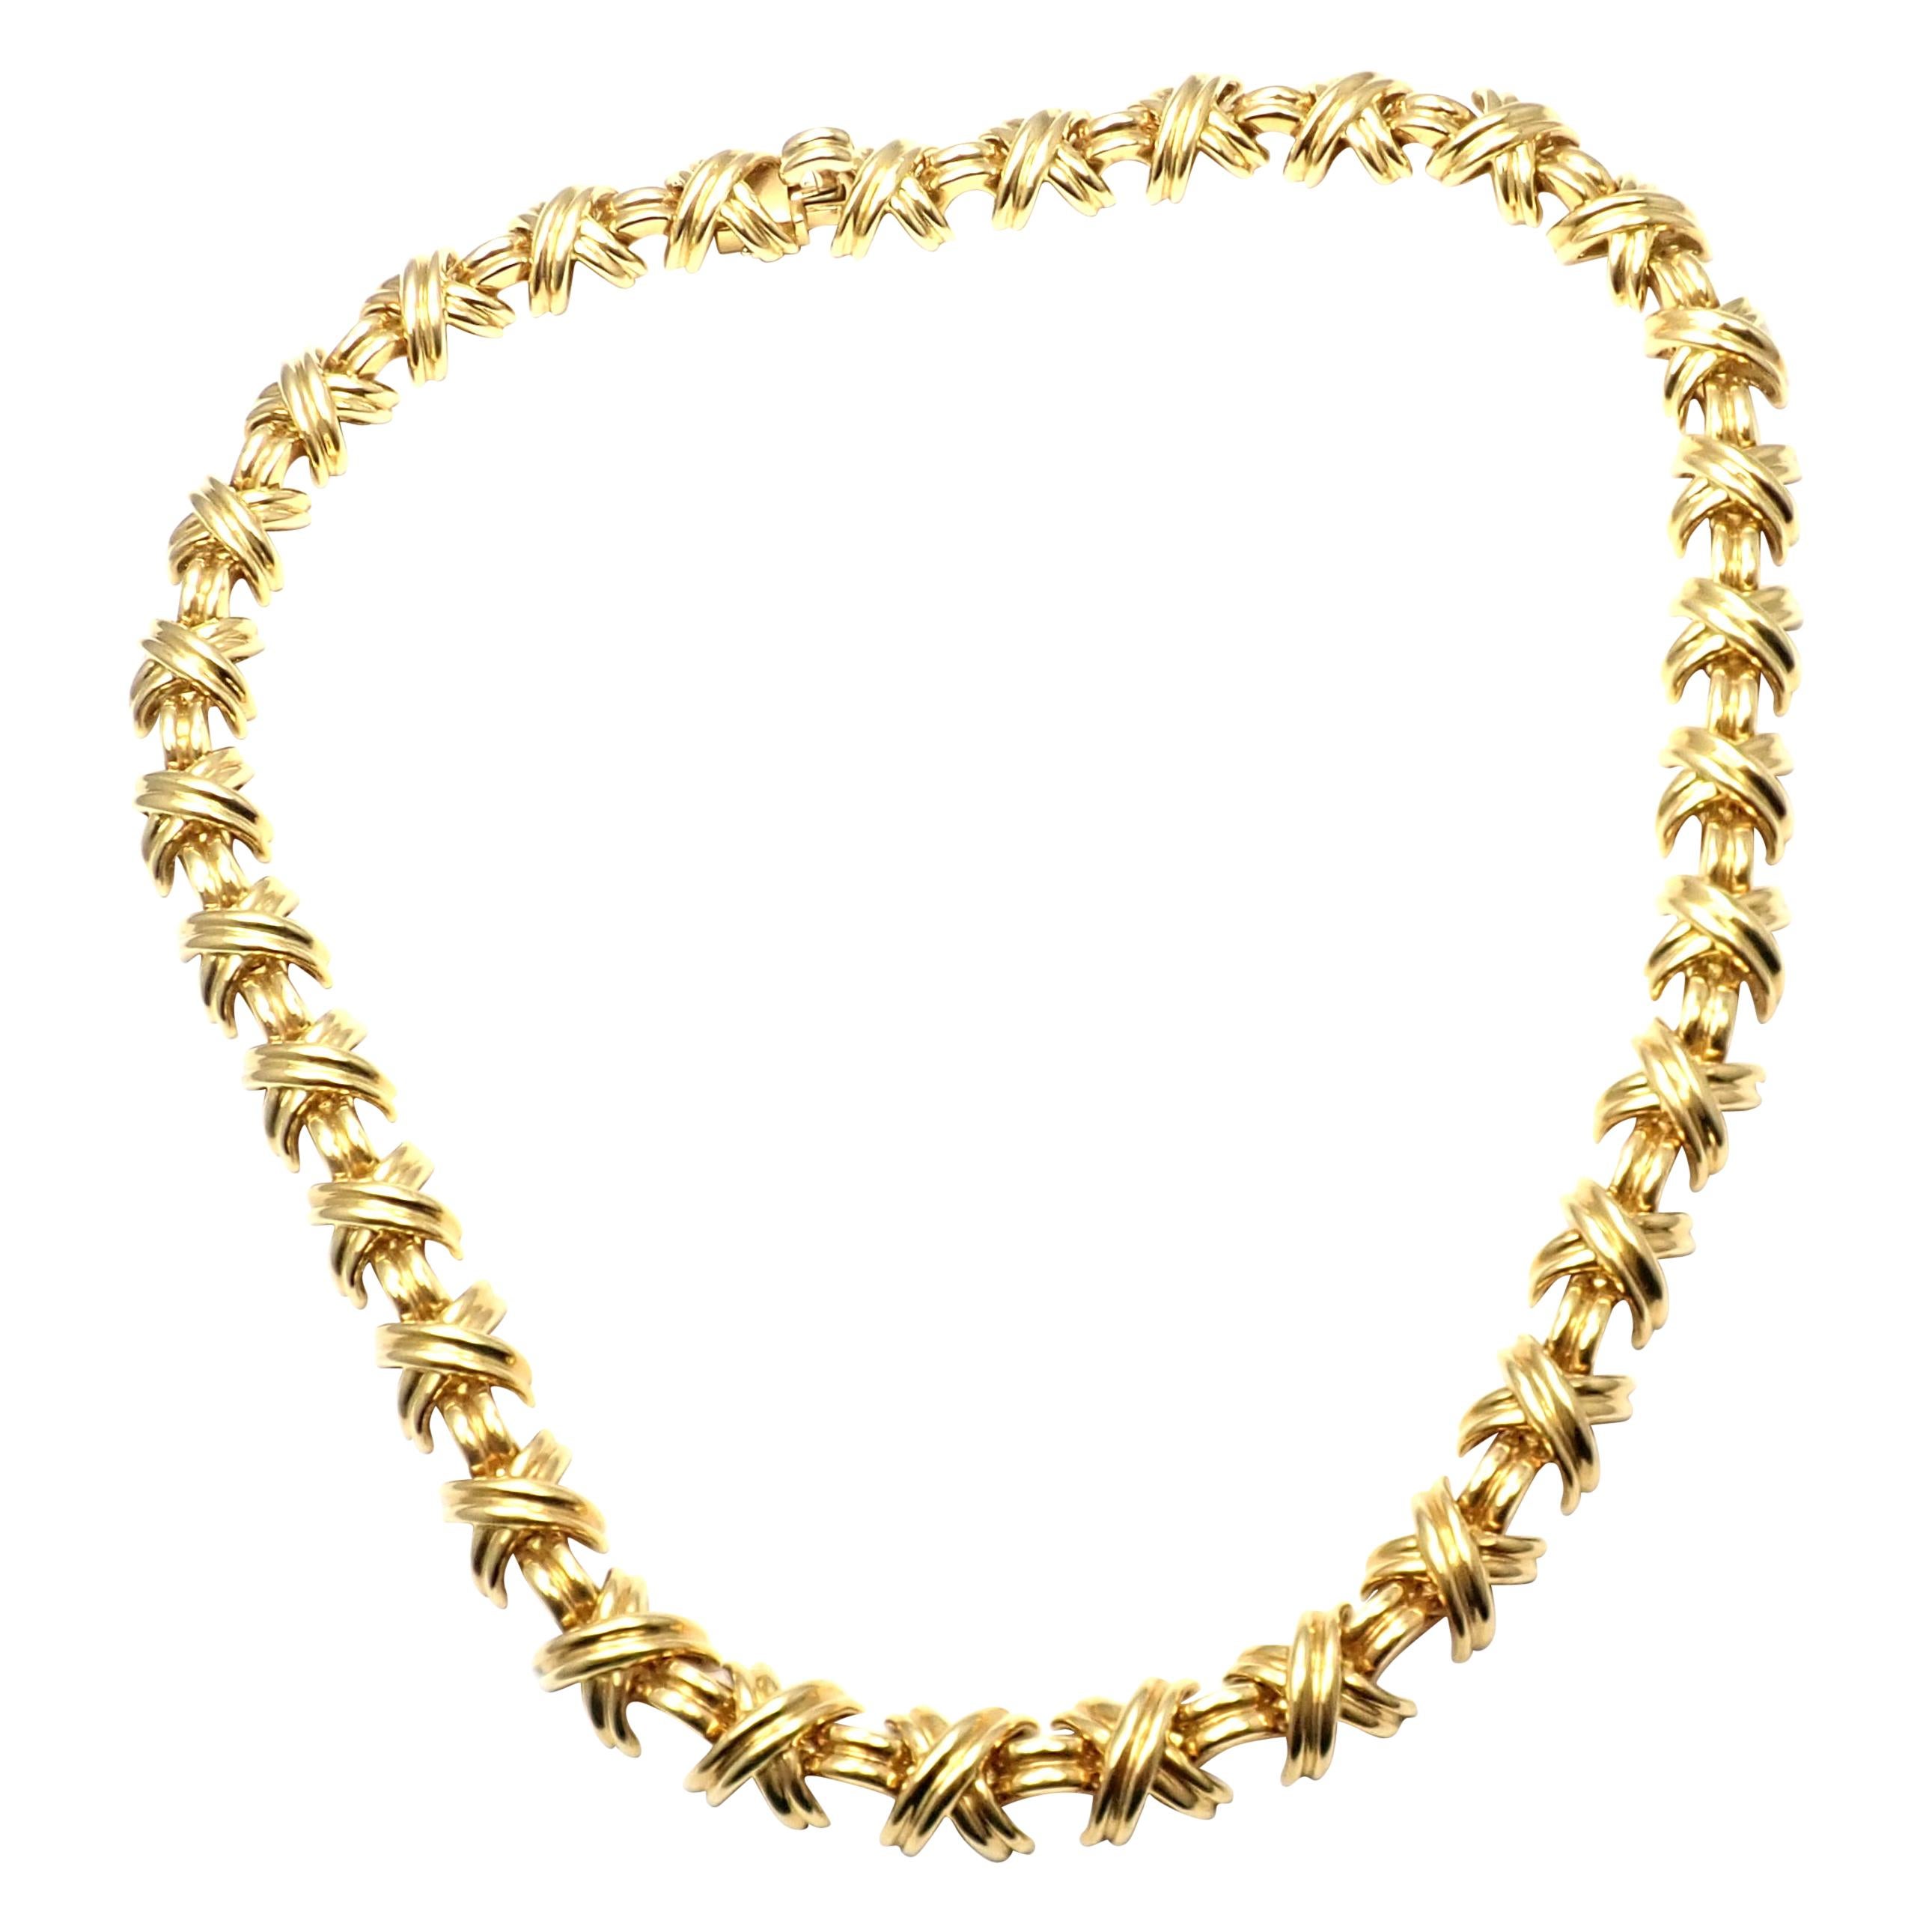 Tiffany & Co. Signature X Link Yellow Gold Necklace